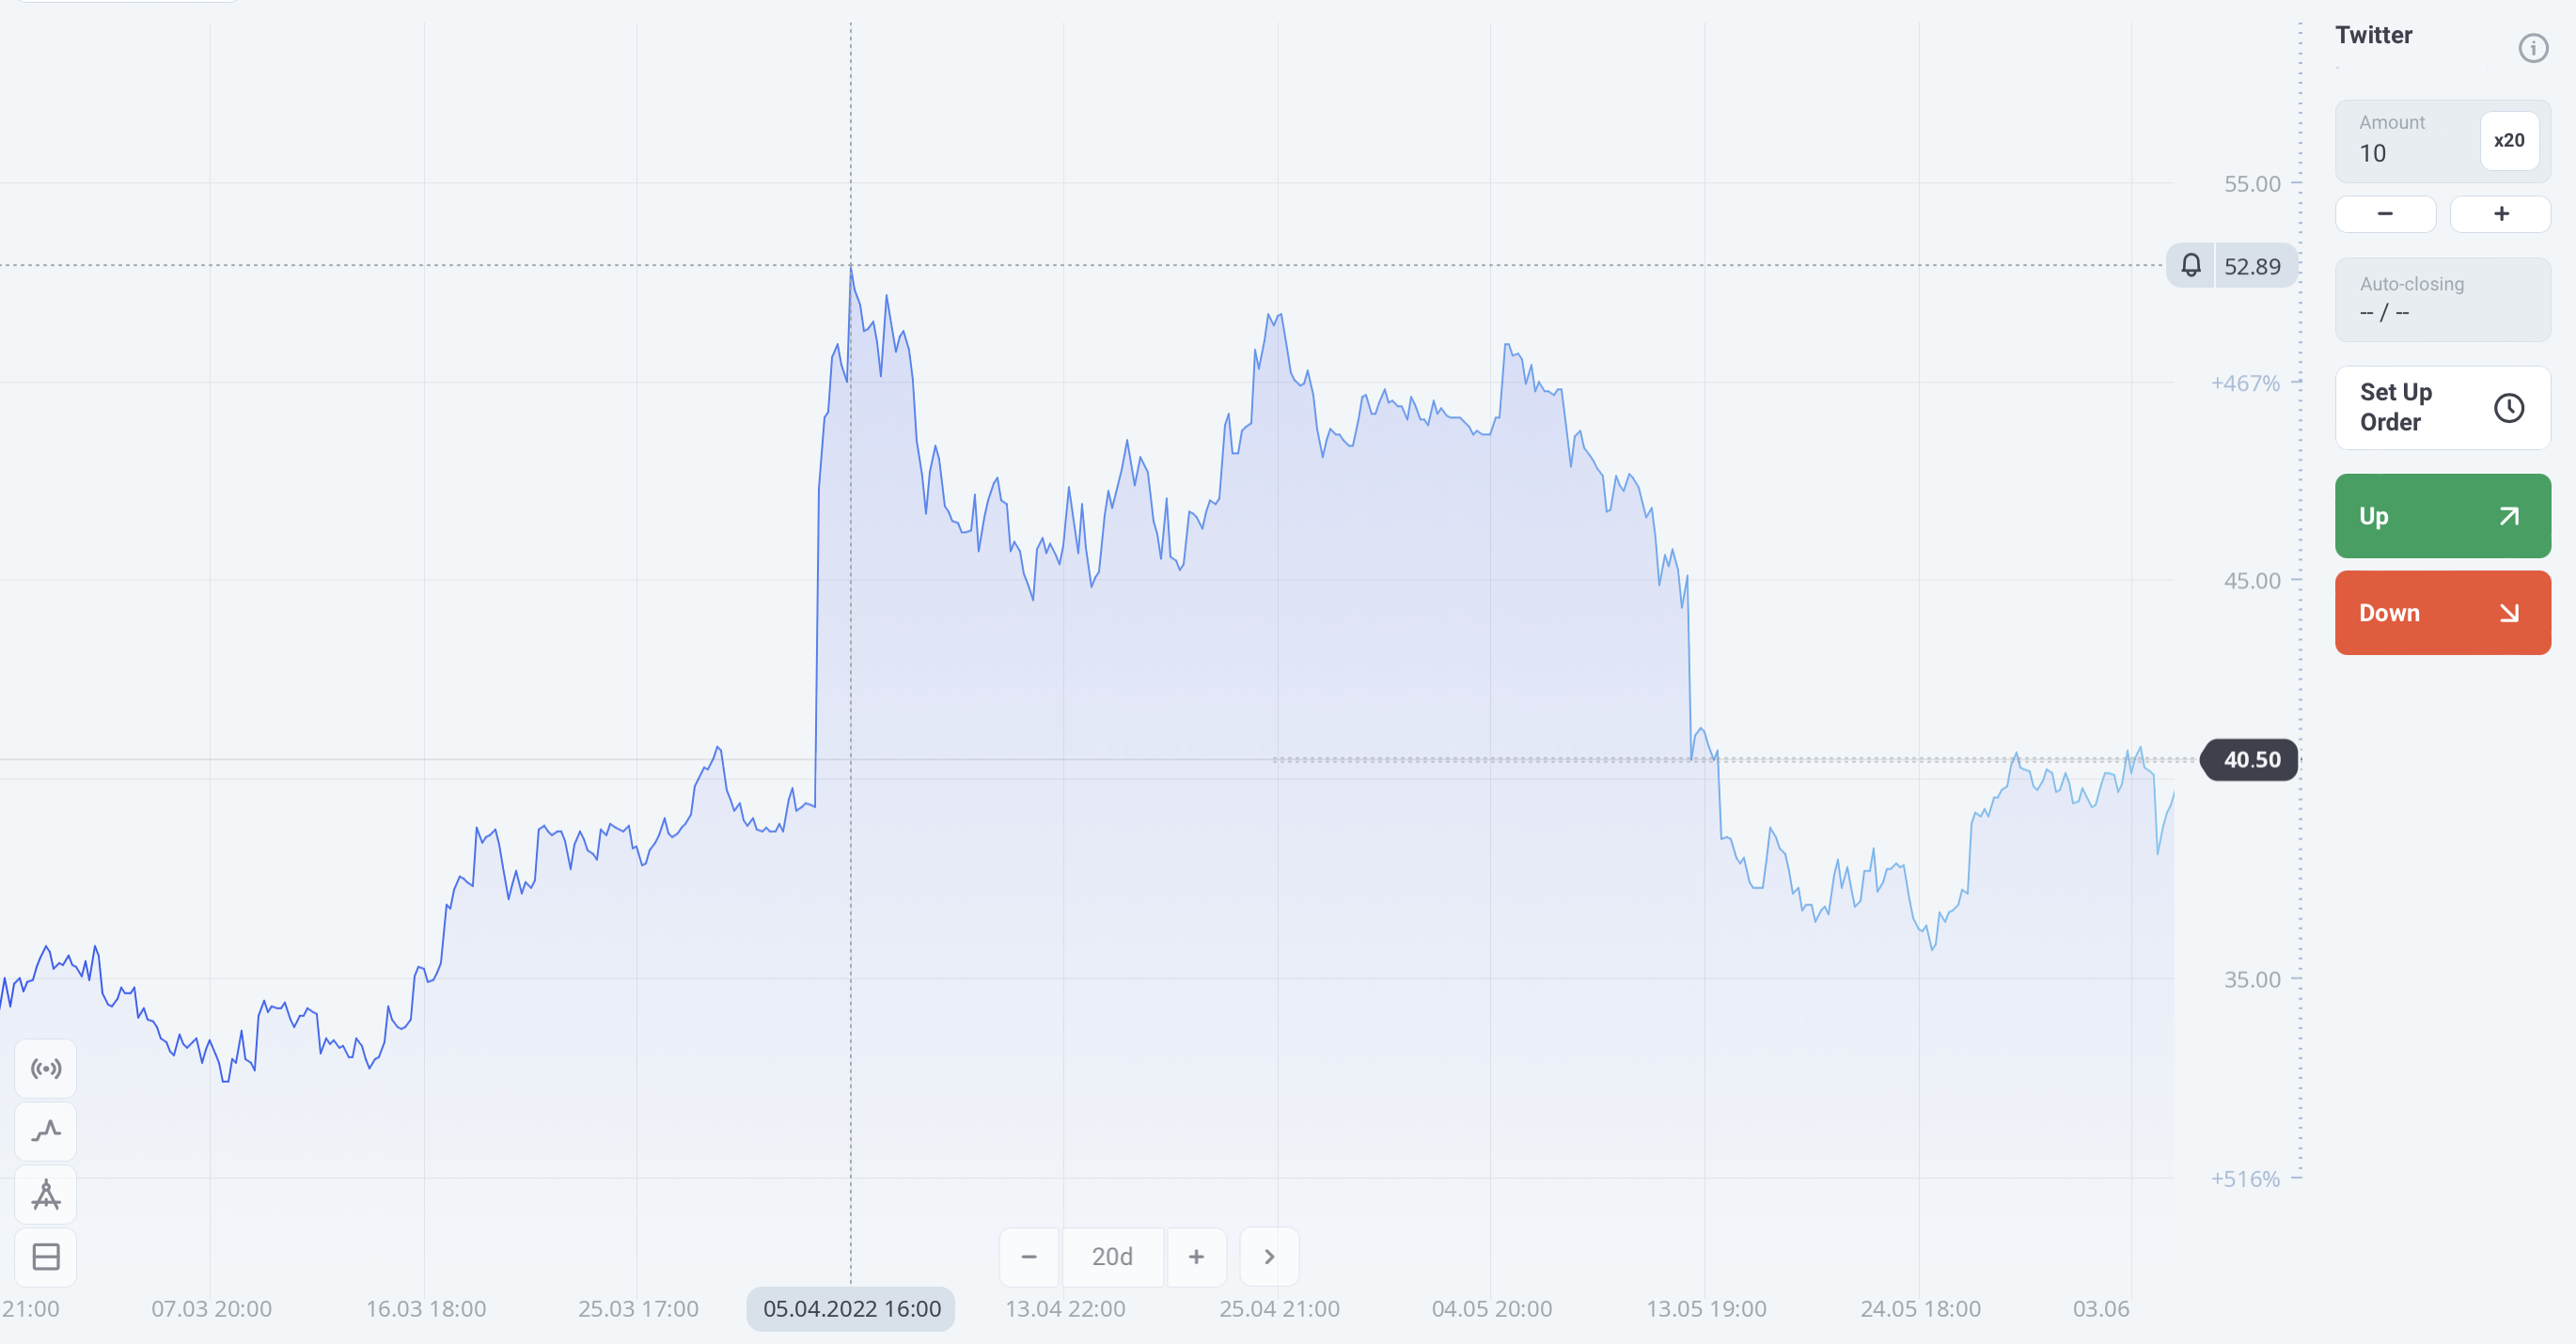 Dramatic rise in the Twitter stock price this year